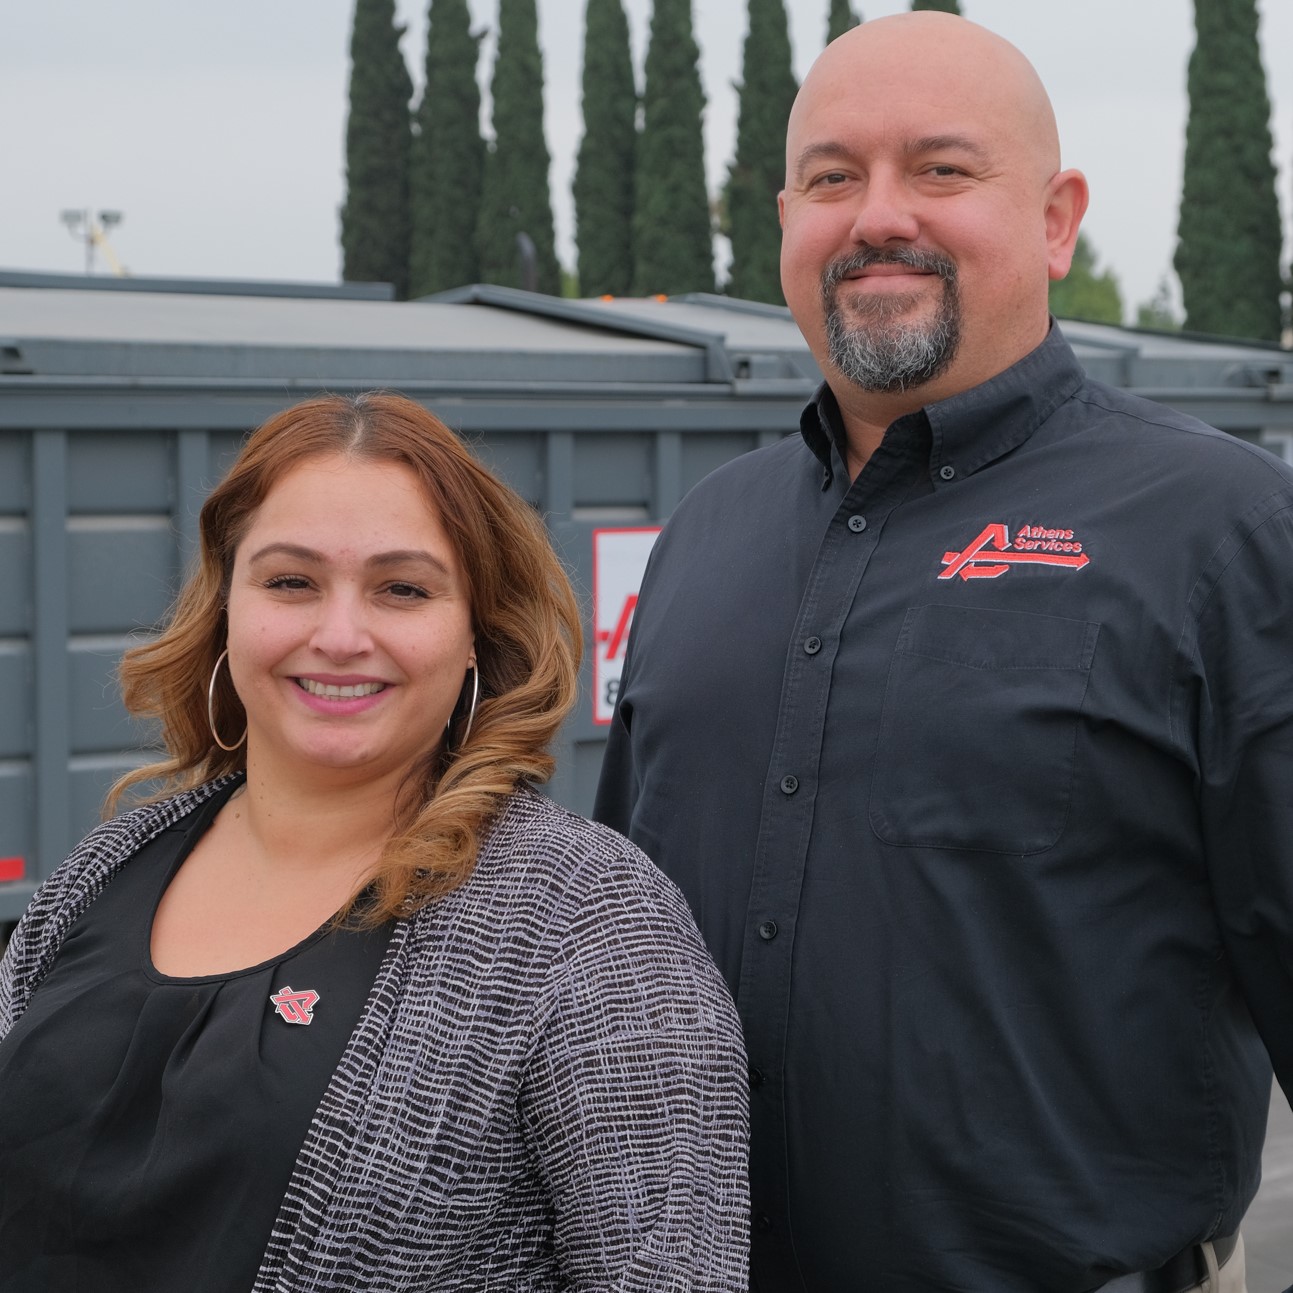 Special Waste Roll-Off Coordinator Claudia Arellano and Special Waste Manager Jaime Aleman